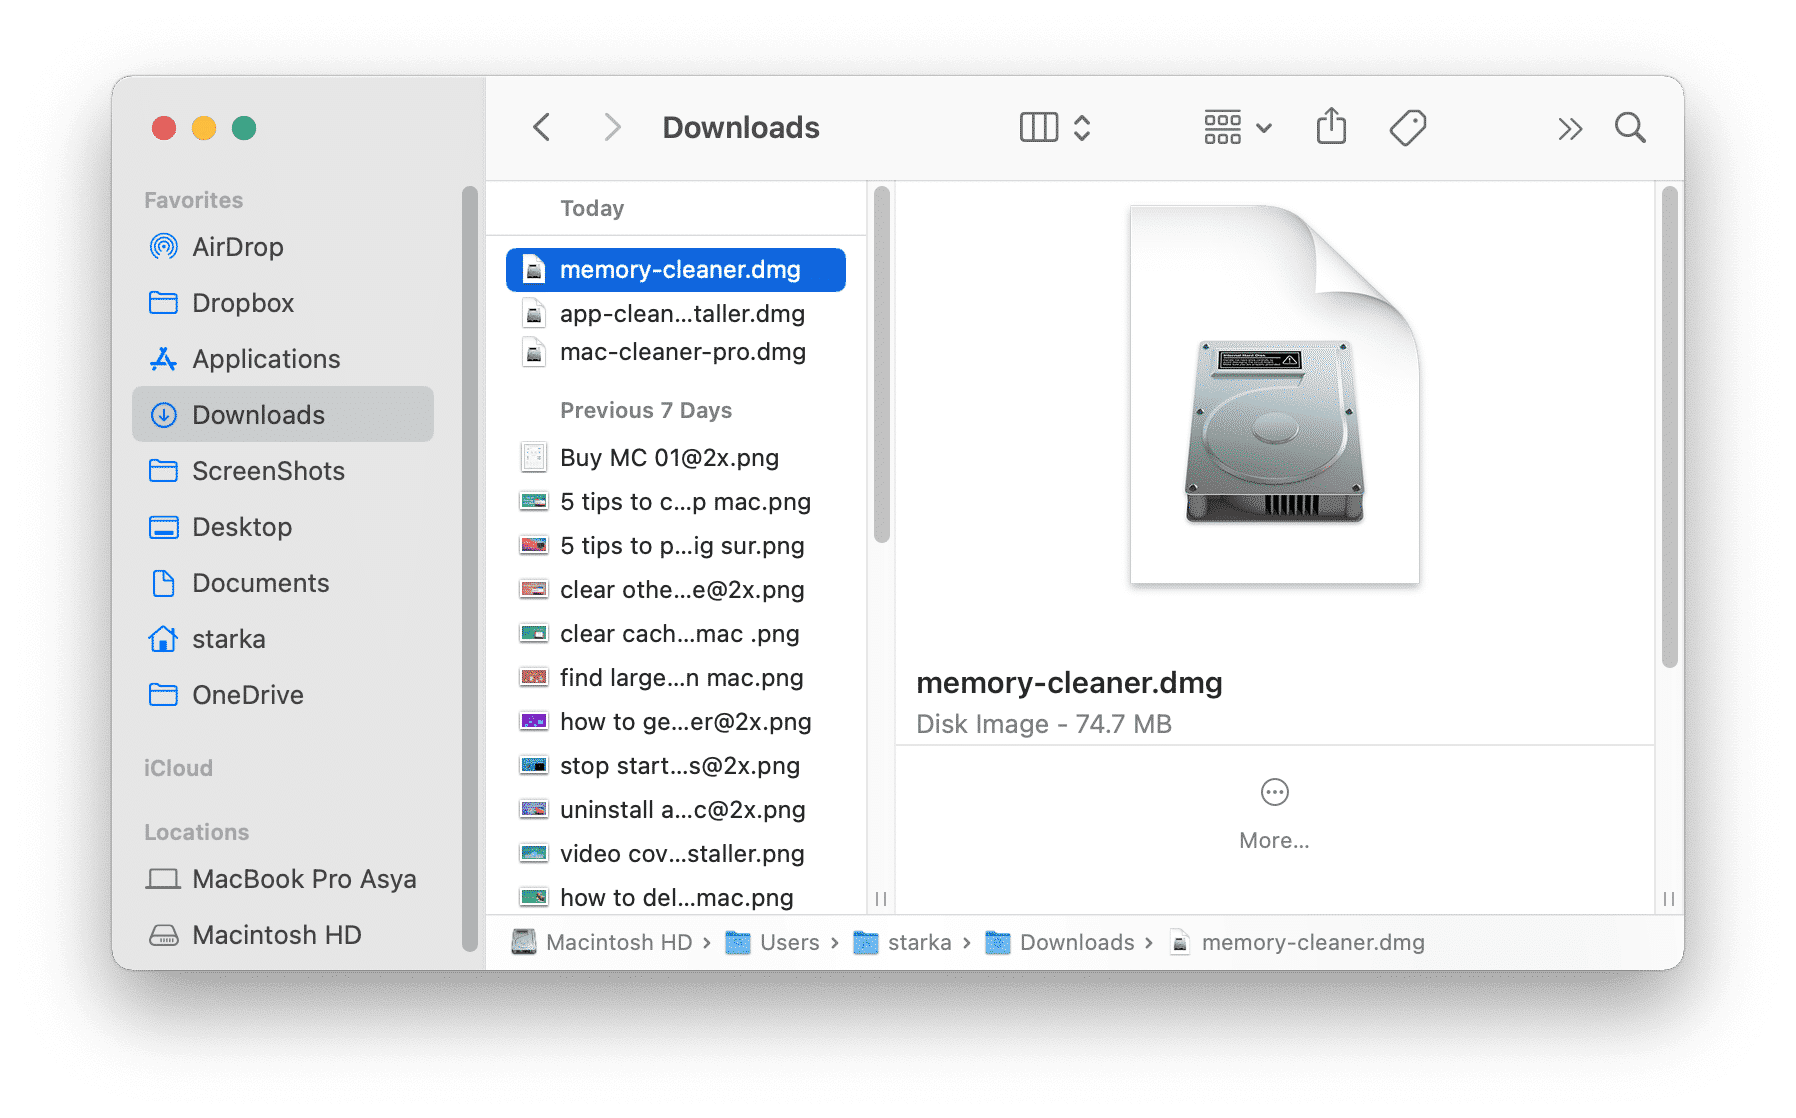 Downloads showing installations on Mac